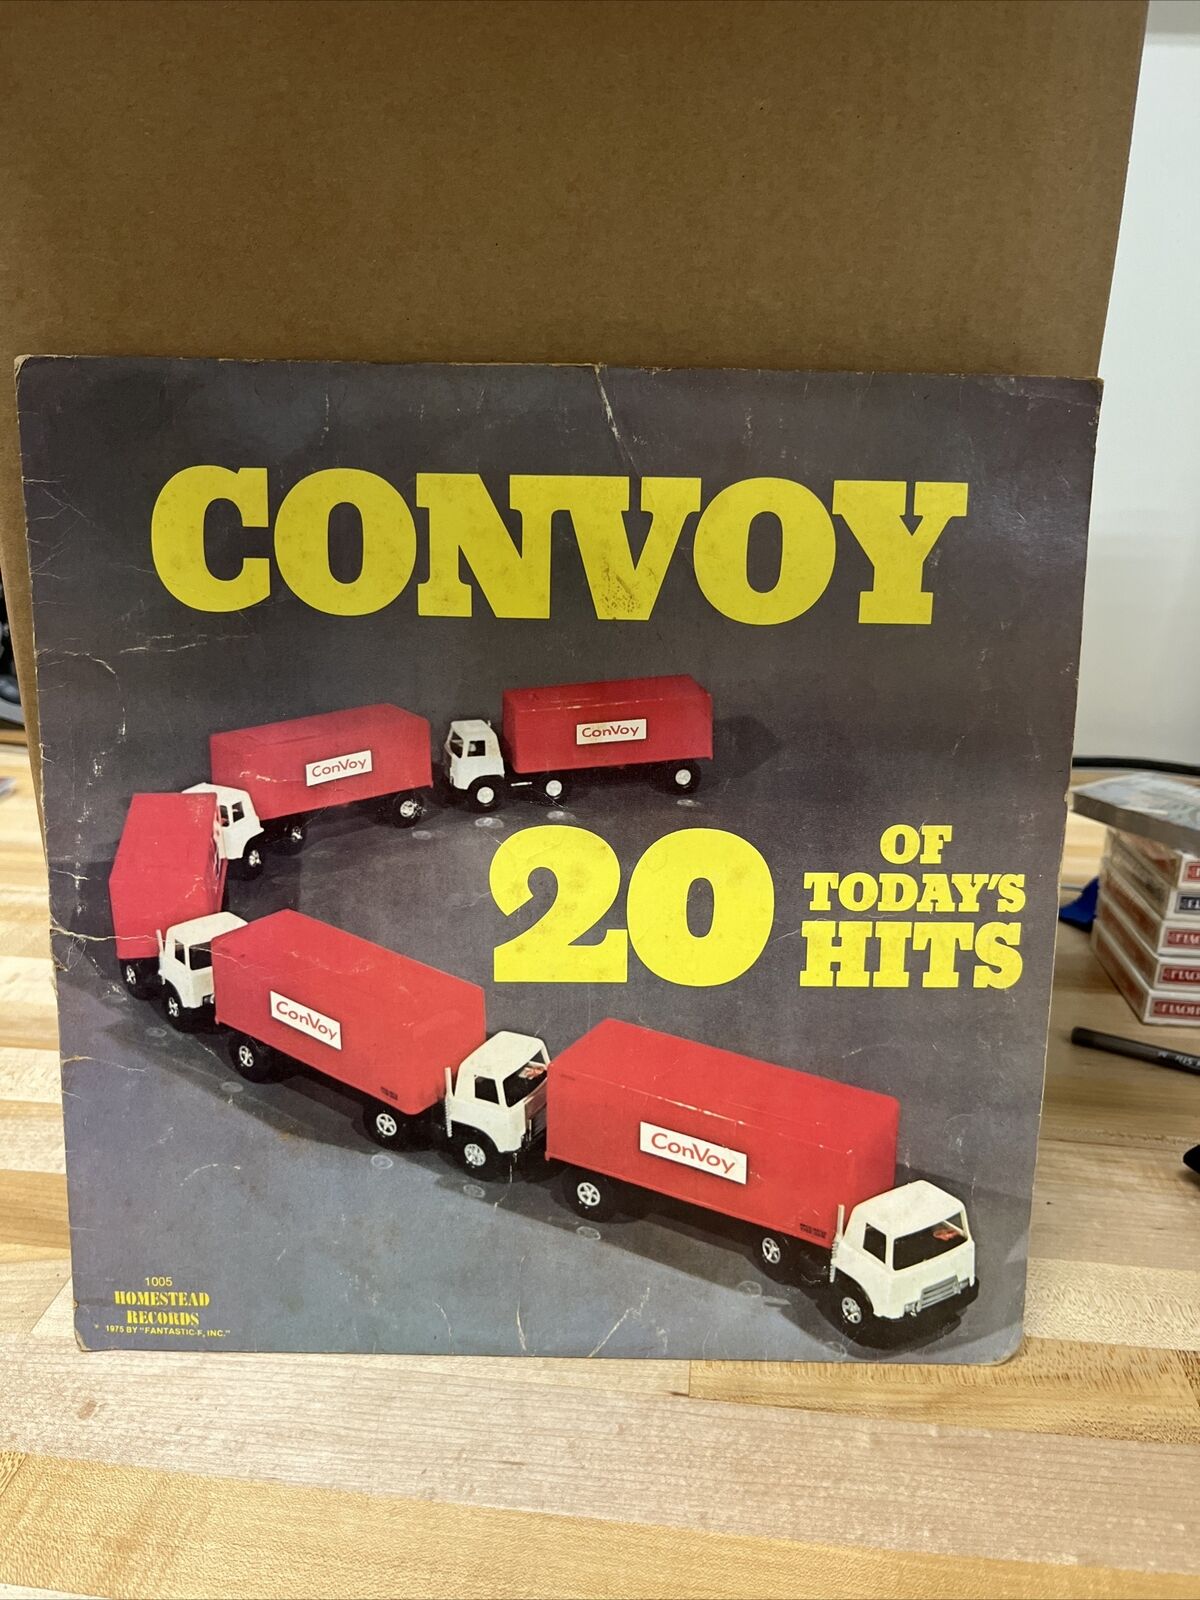 CONVOY "VARIOUS ARTISTS" (1975). KISS, ELO AND MORE!!! Homestead HR 1005